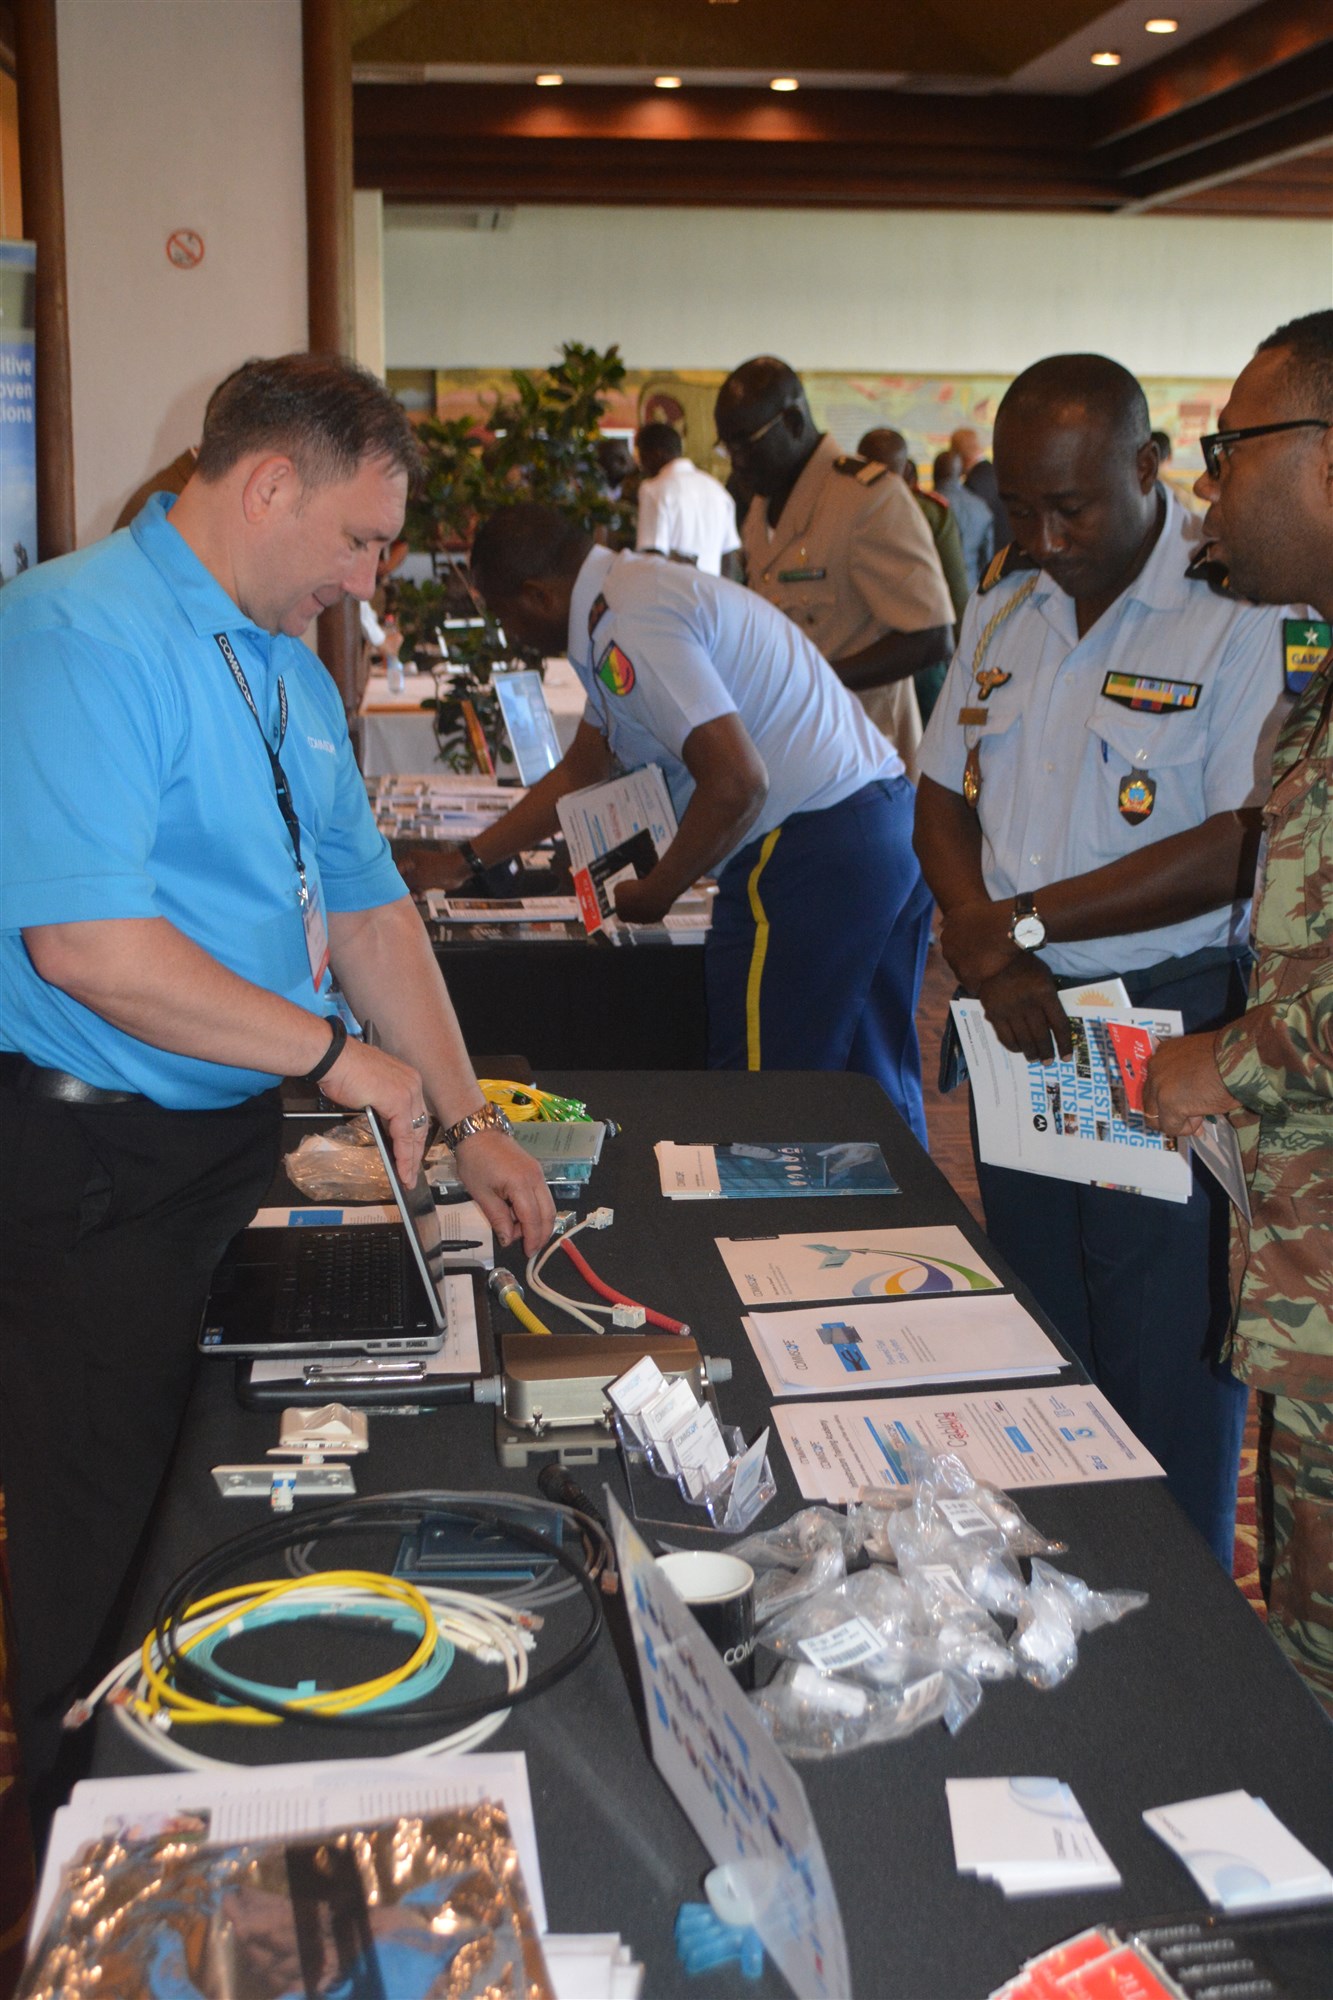 Africa Endeavor 16 participants listen to a technology expo representative talk about various Command, Control, Communications and Computer Systems (C4) solutions 18 Aug., 2016.  AE16 is an annual U.S. Africa Command sponsored training and information sharing effort to help develop African multi-national communication interoperability for African Union and United Nations mandated peacekeeping and disaster response in Africa.  Over 40 African nations participated in this year's events